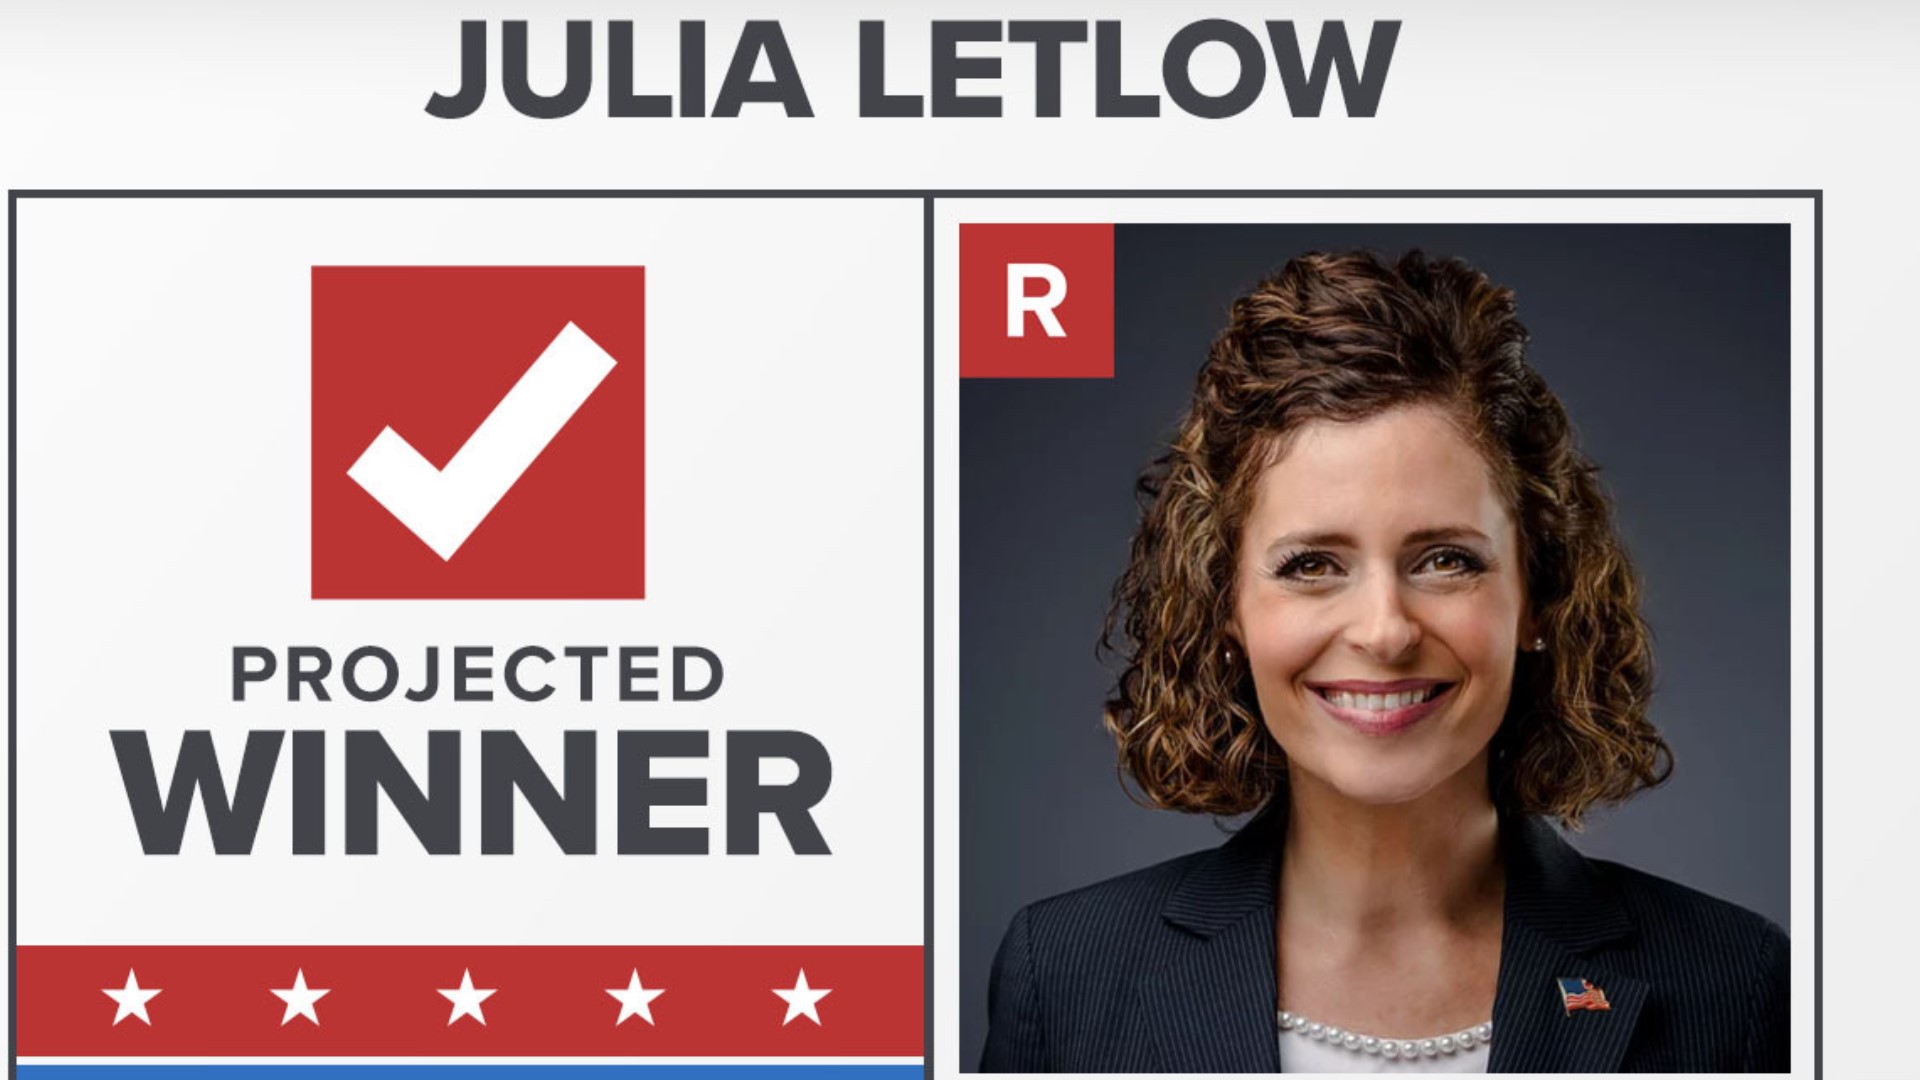 Julia Letlow is the projected winner of the US Representative seat. A seat once set for her husband Luke Letlow before he contracted COVID-19.